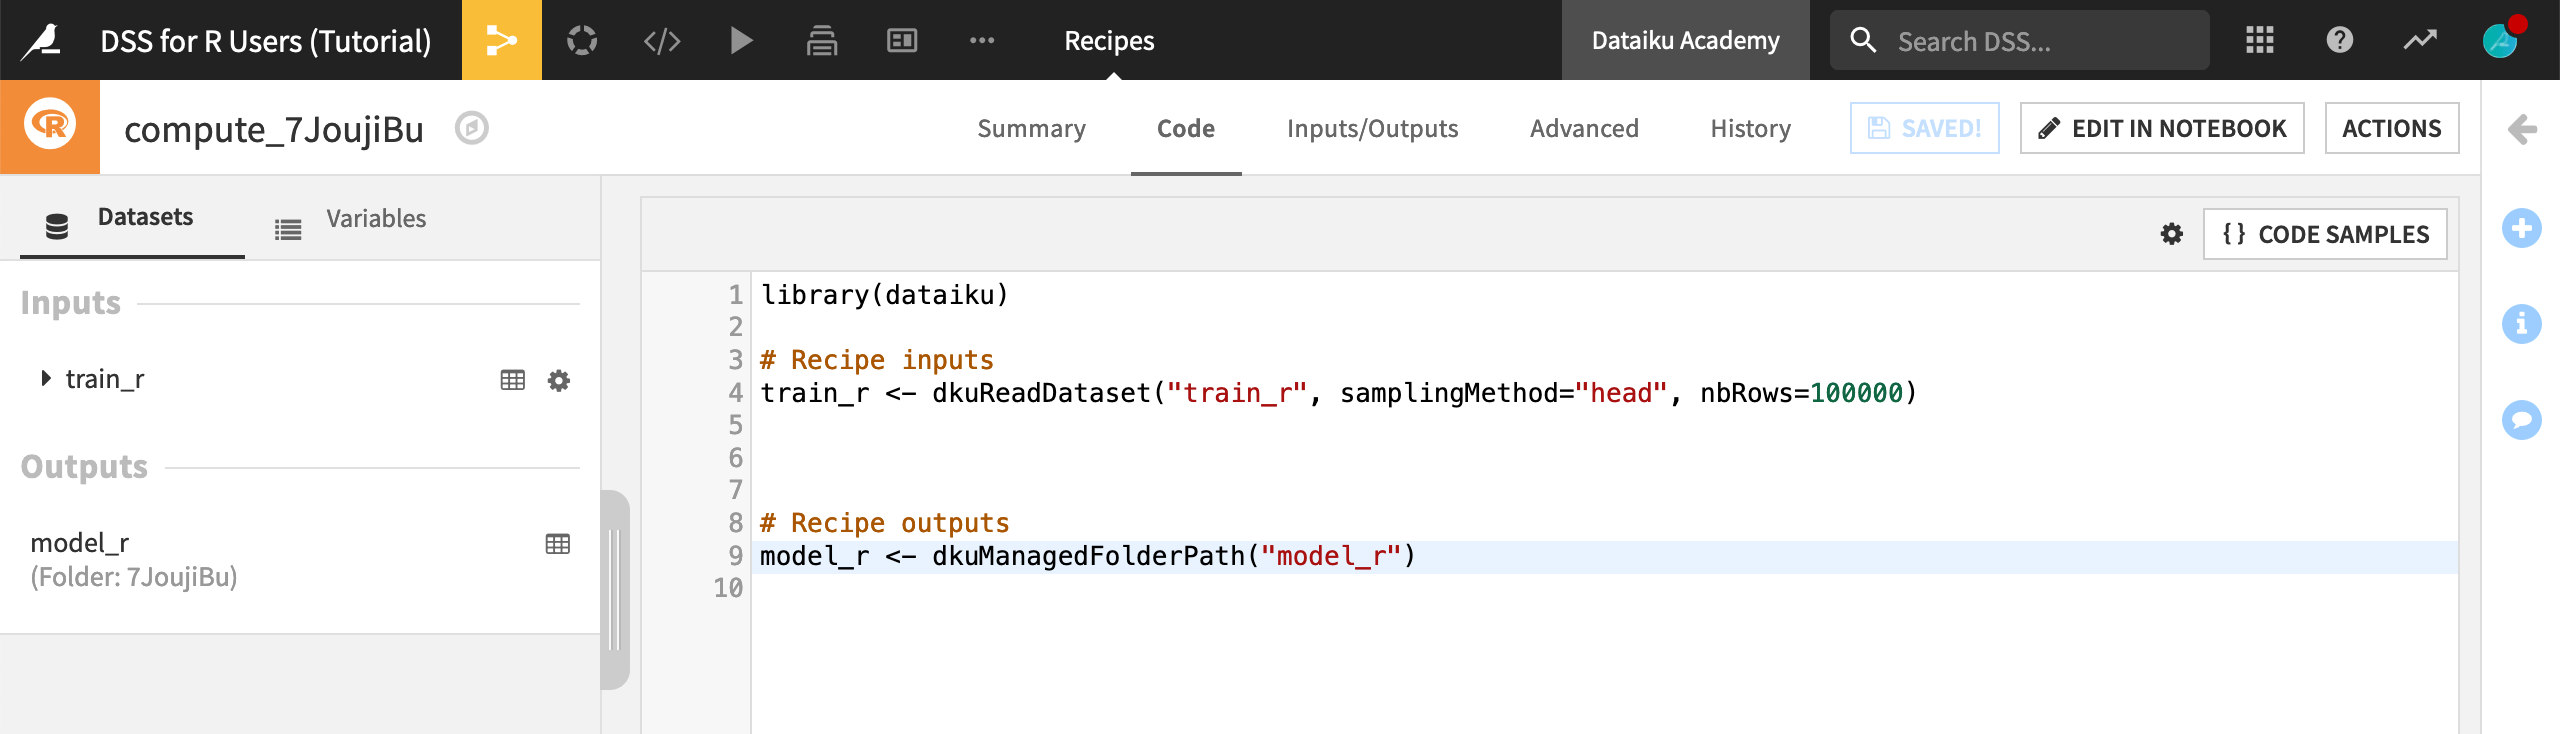 Default R code recipe with a dataset input and folder output